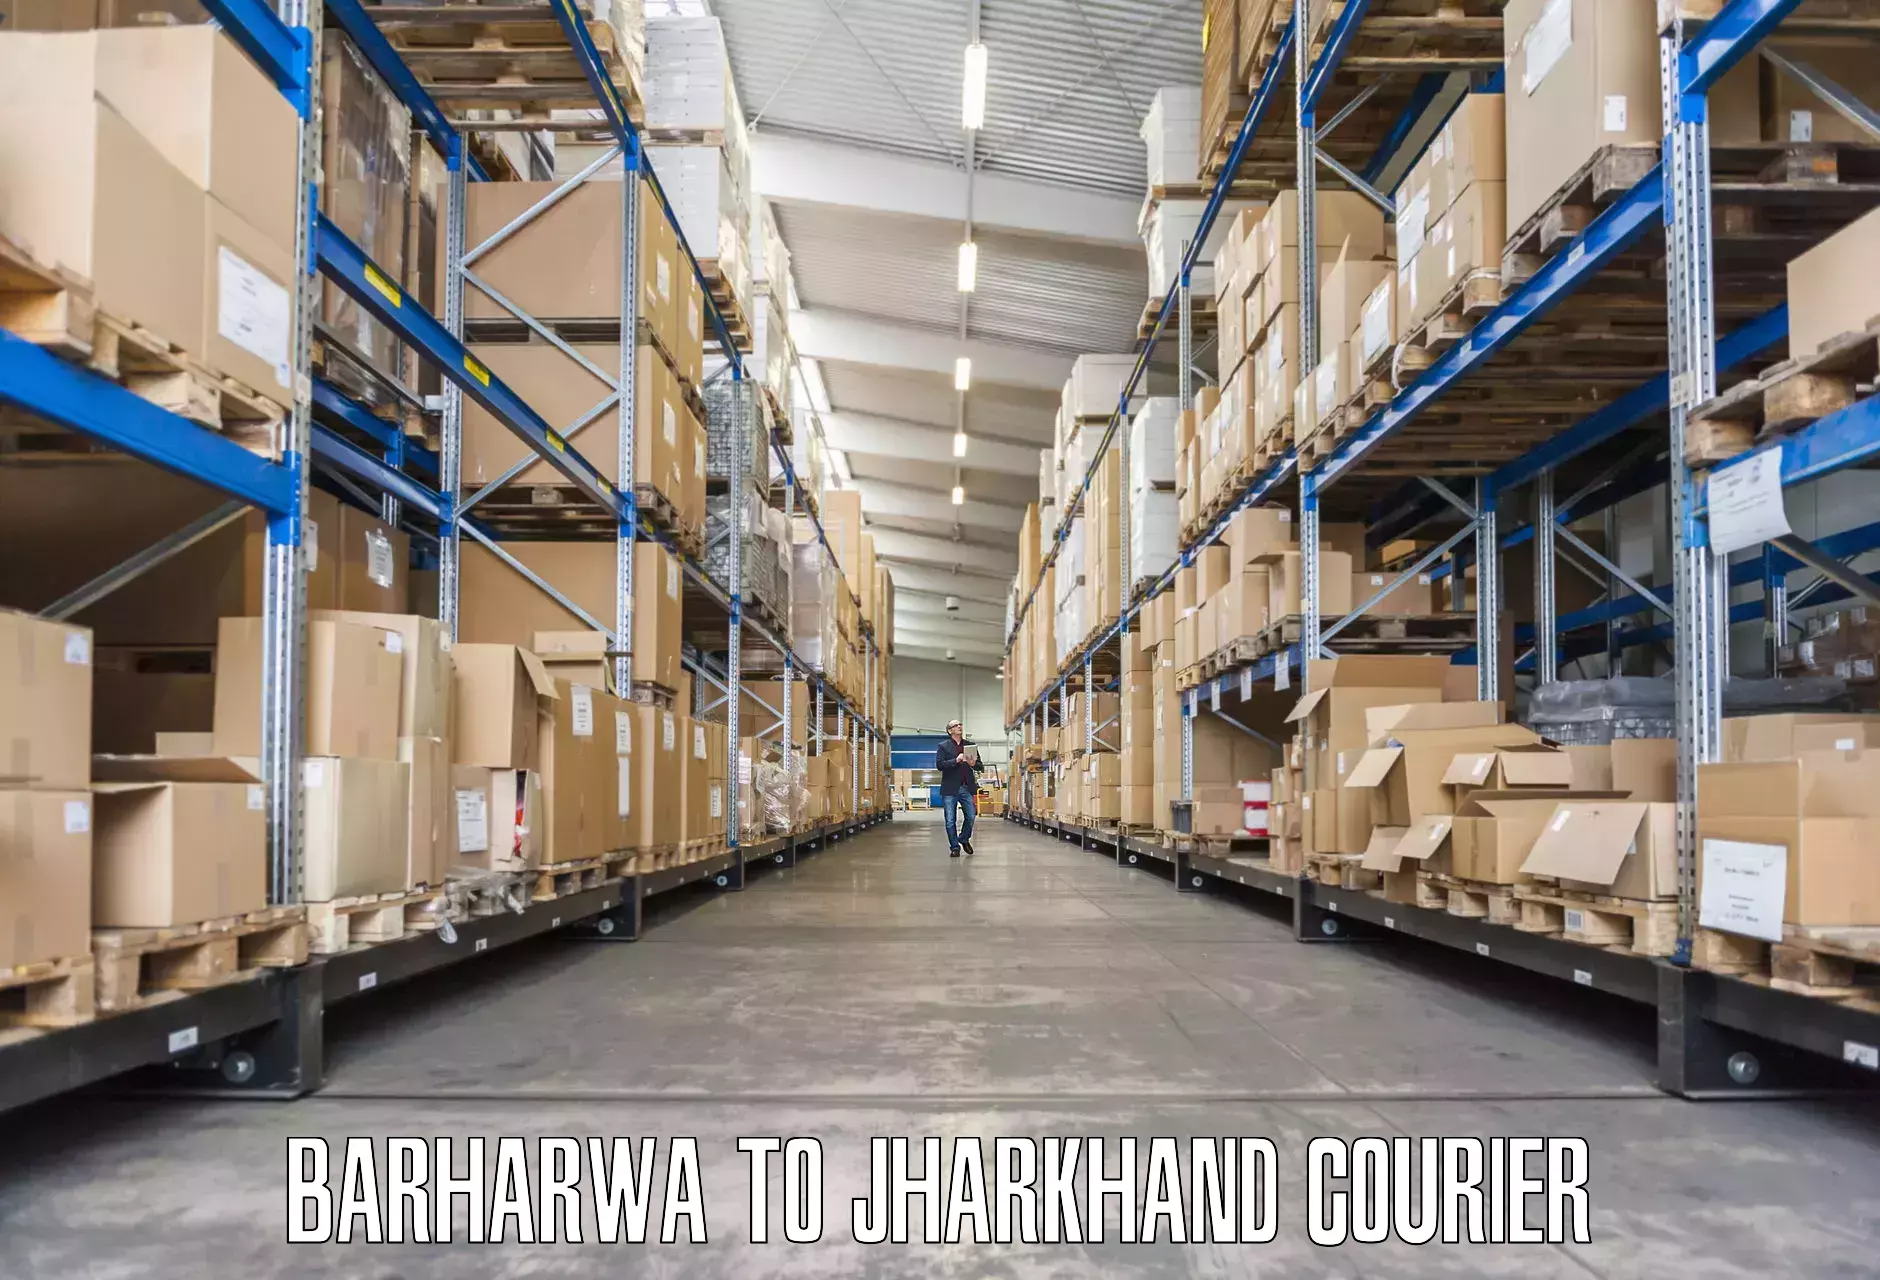 Professional movers and packers in Barharwa to Daltonganj